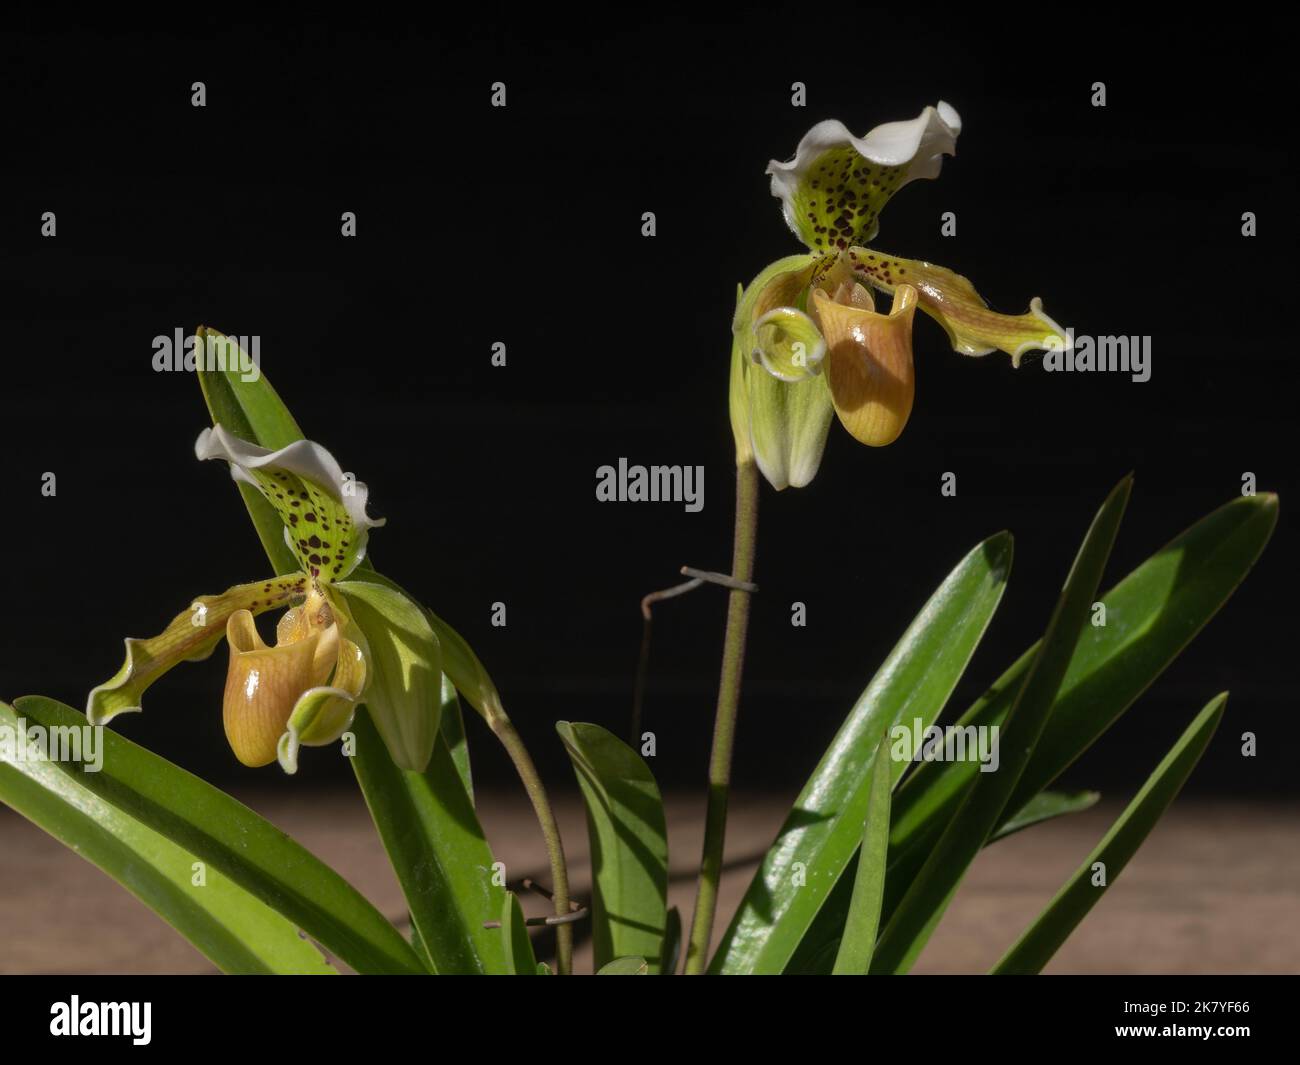 Beautiful yellow brown and green flowers of lady slipper orchid species paphiopedilum exul isolated on dark background Stock Photo